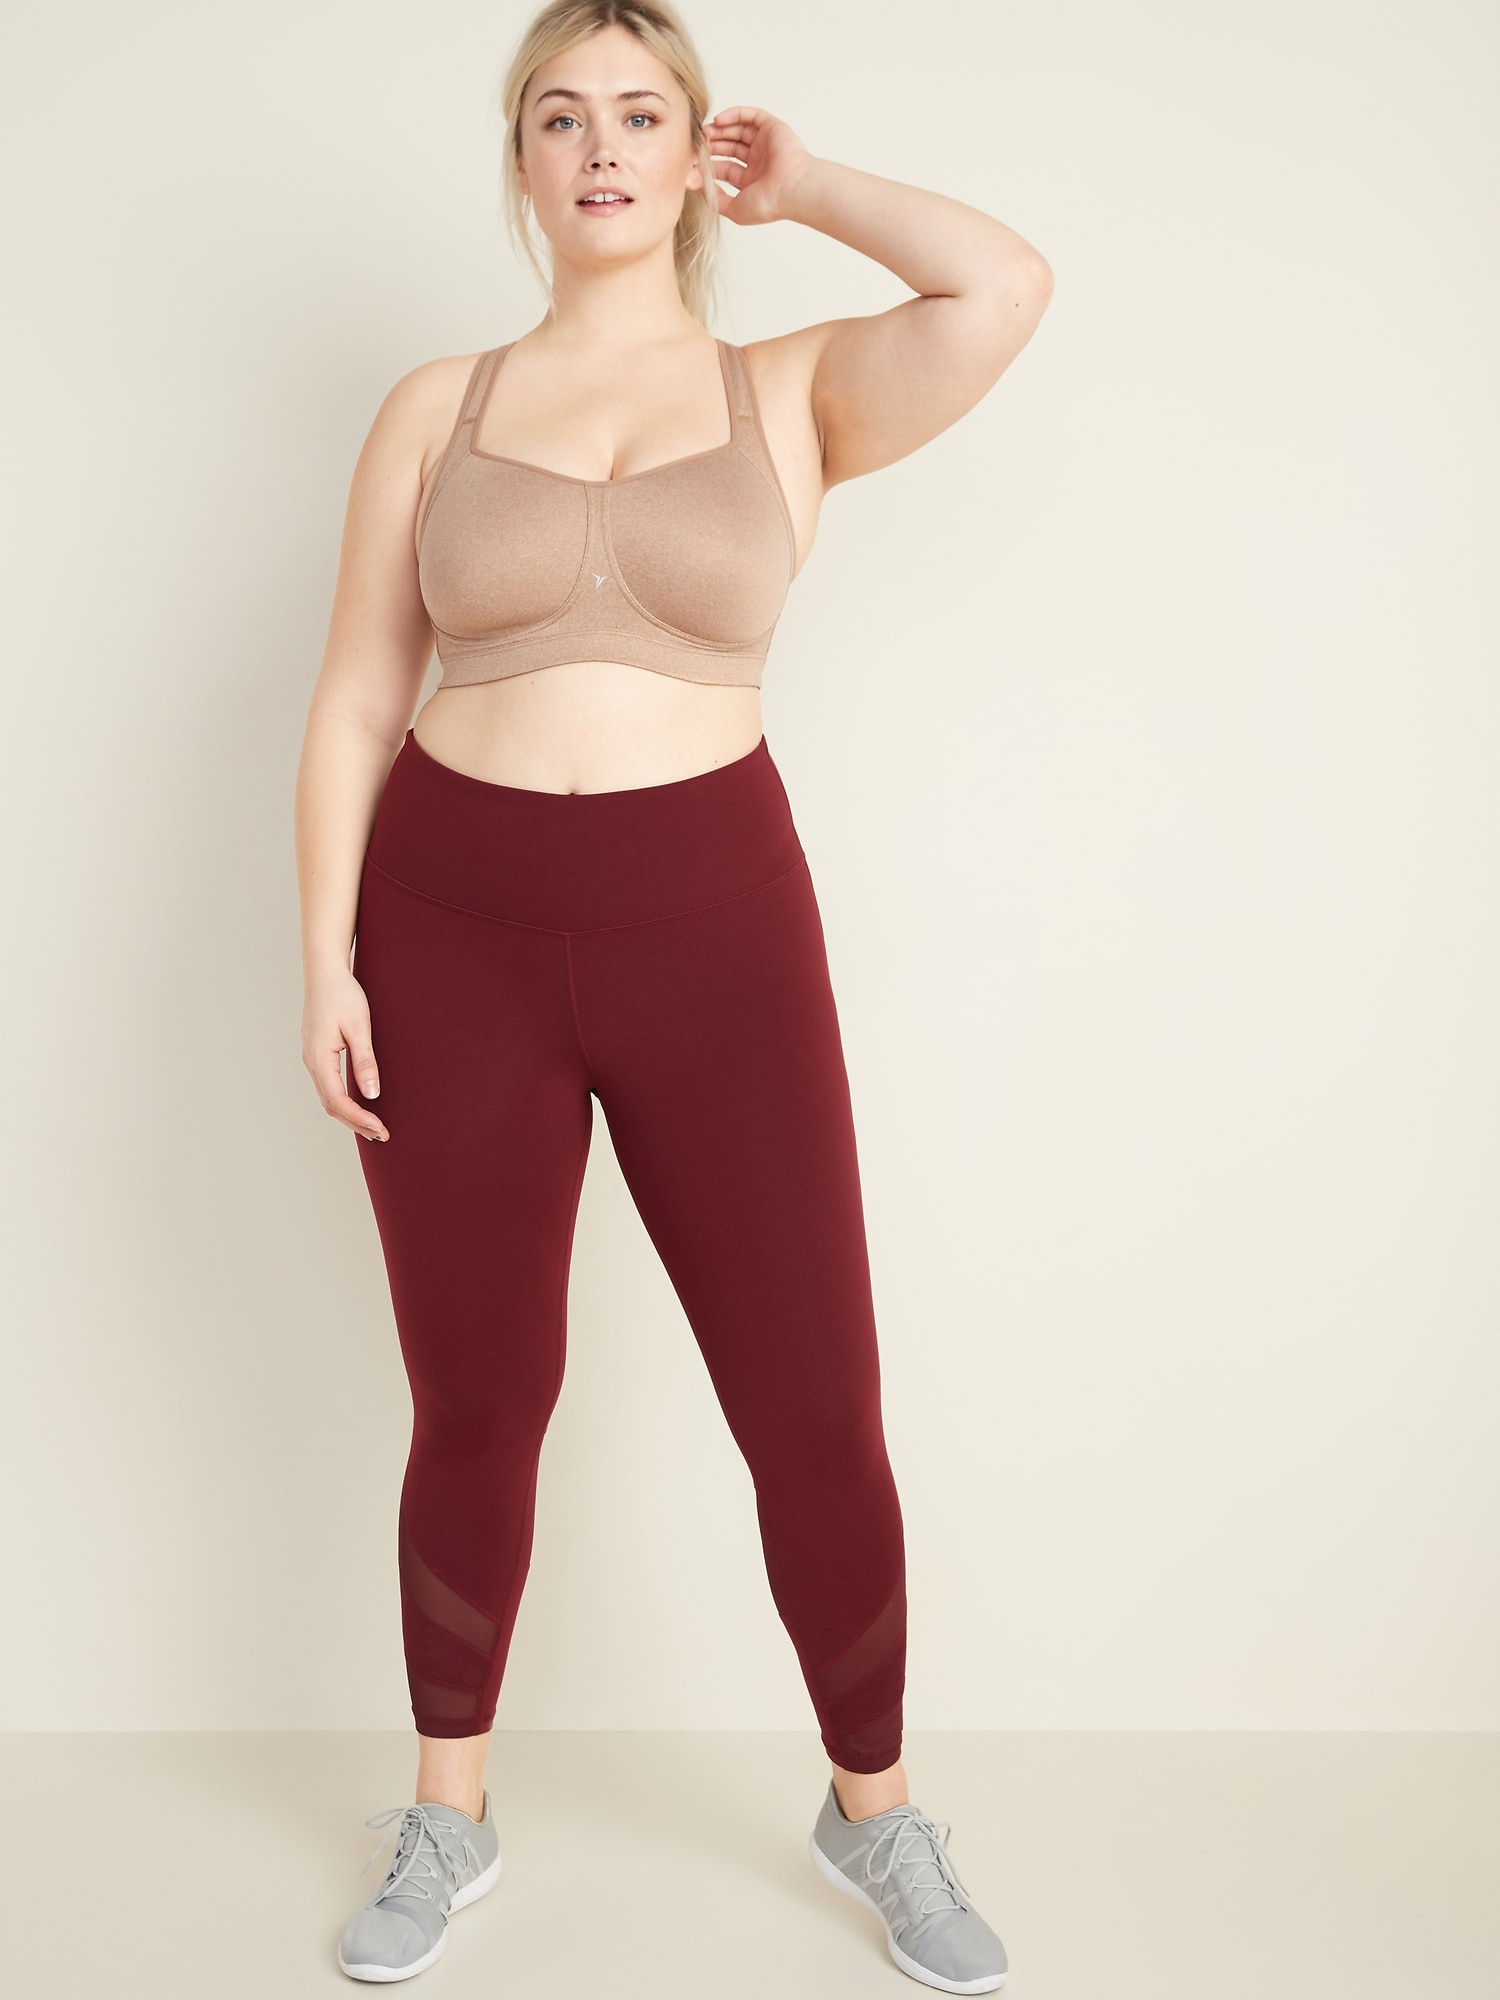 High-Support Plus-Size Sports Bra